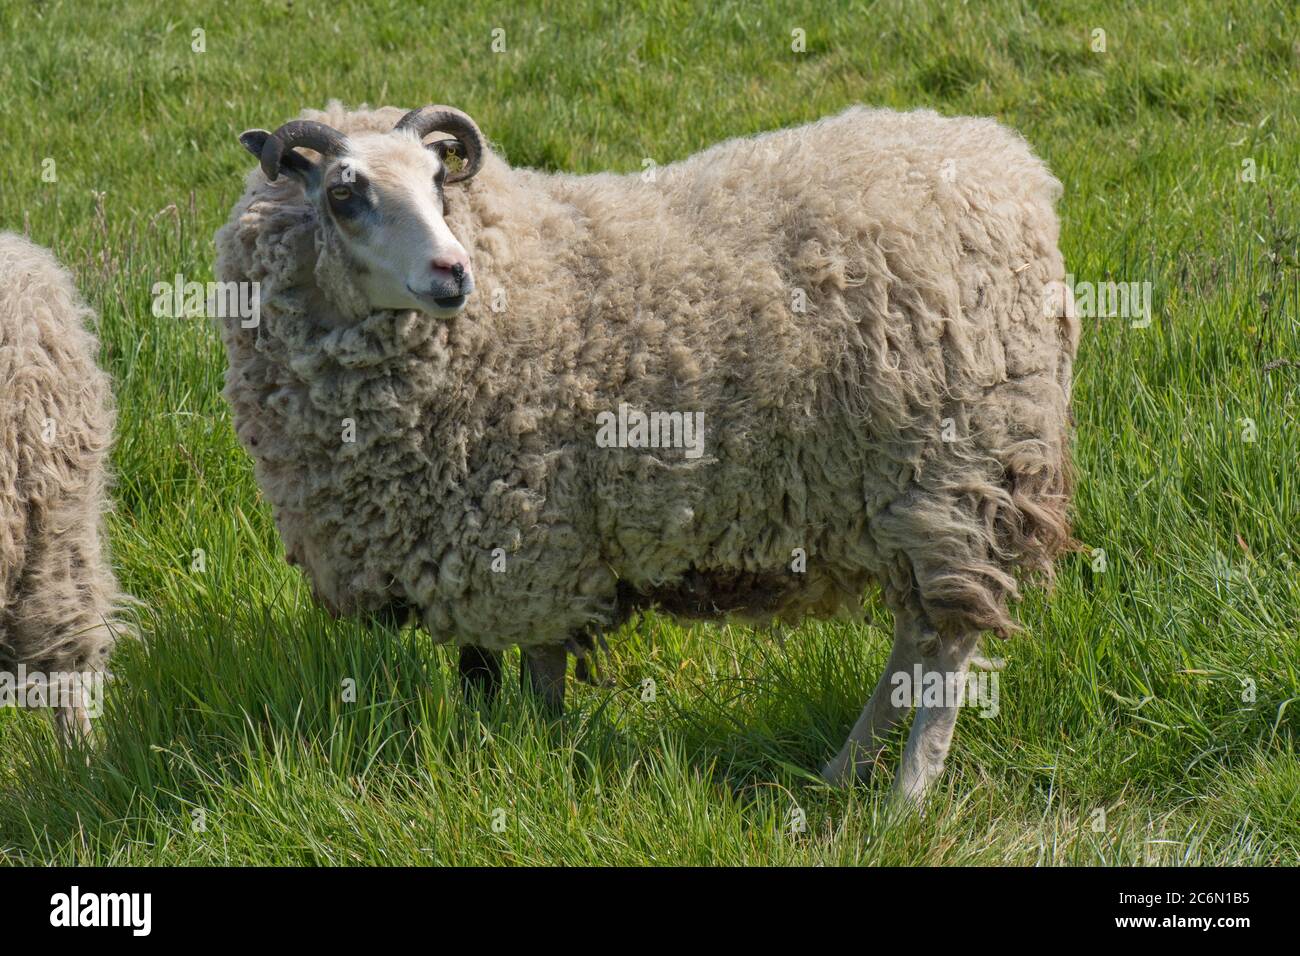 A Shetland sheep wether (neutered male) with full fleece on grass in spring before shearing, Berkshire, May Stock Photo